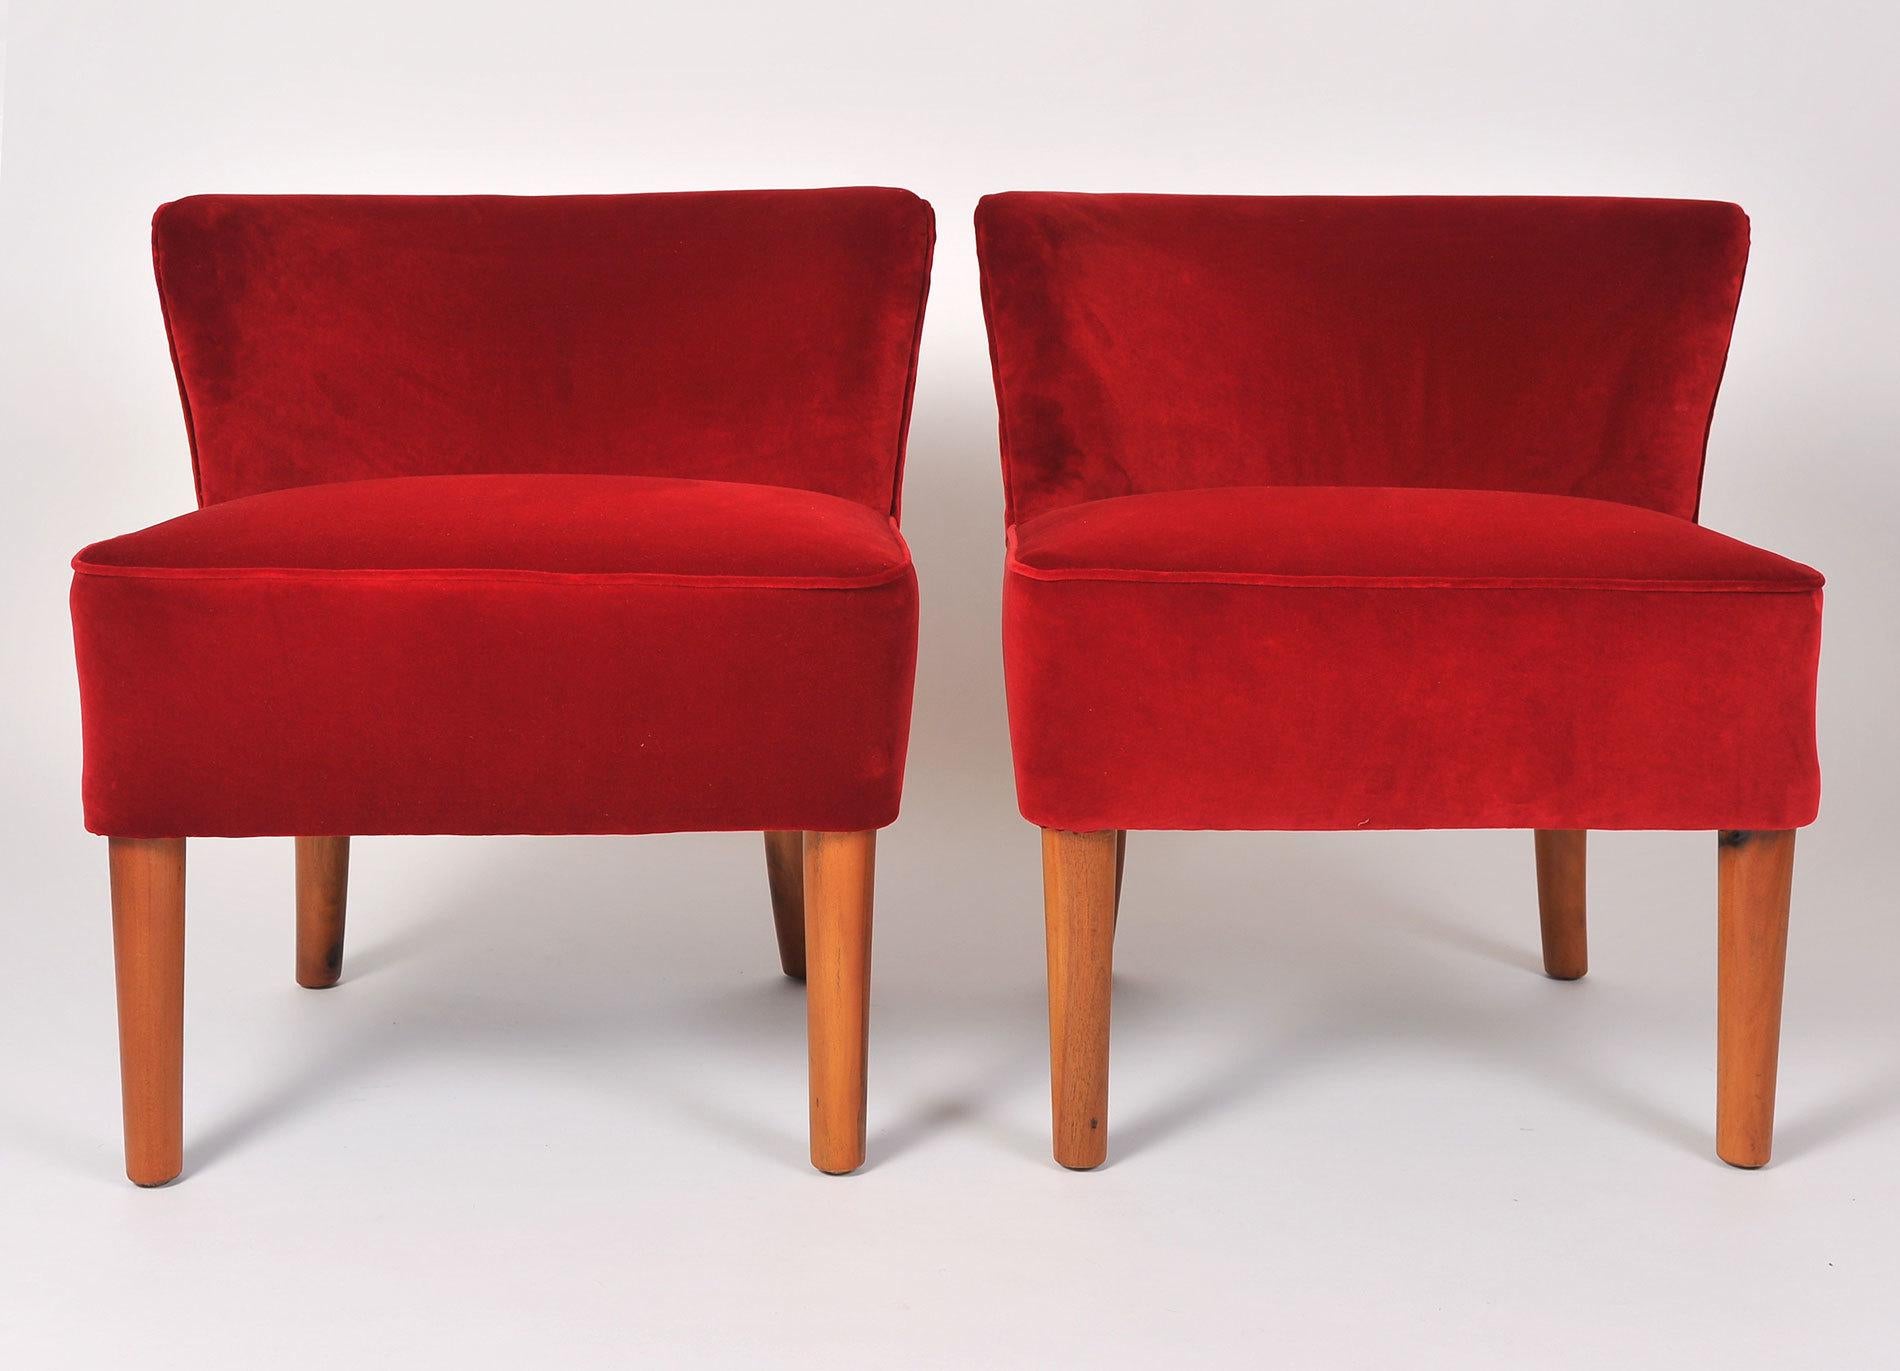 Generous pair of occasional chairs with cherry-wood tapered legs, re-upholstered in red velvet.